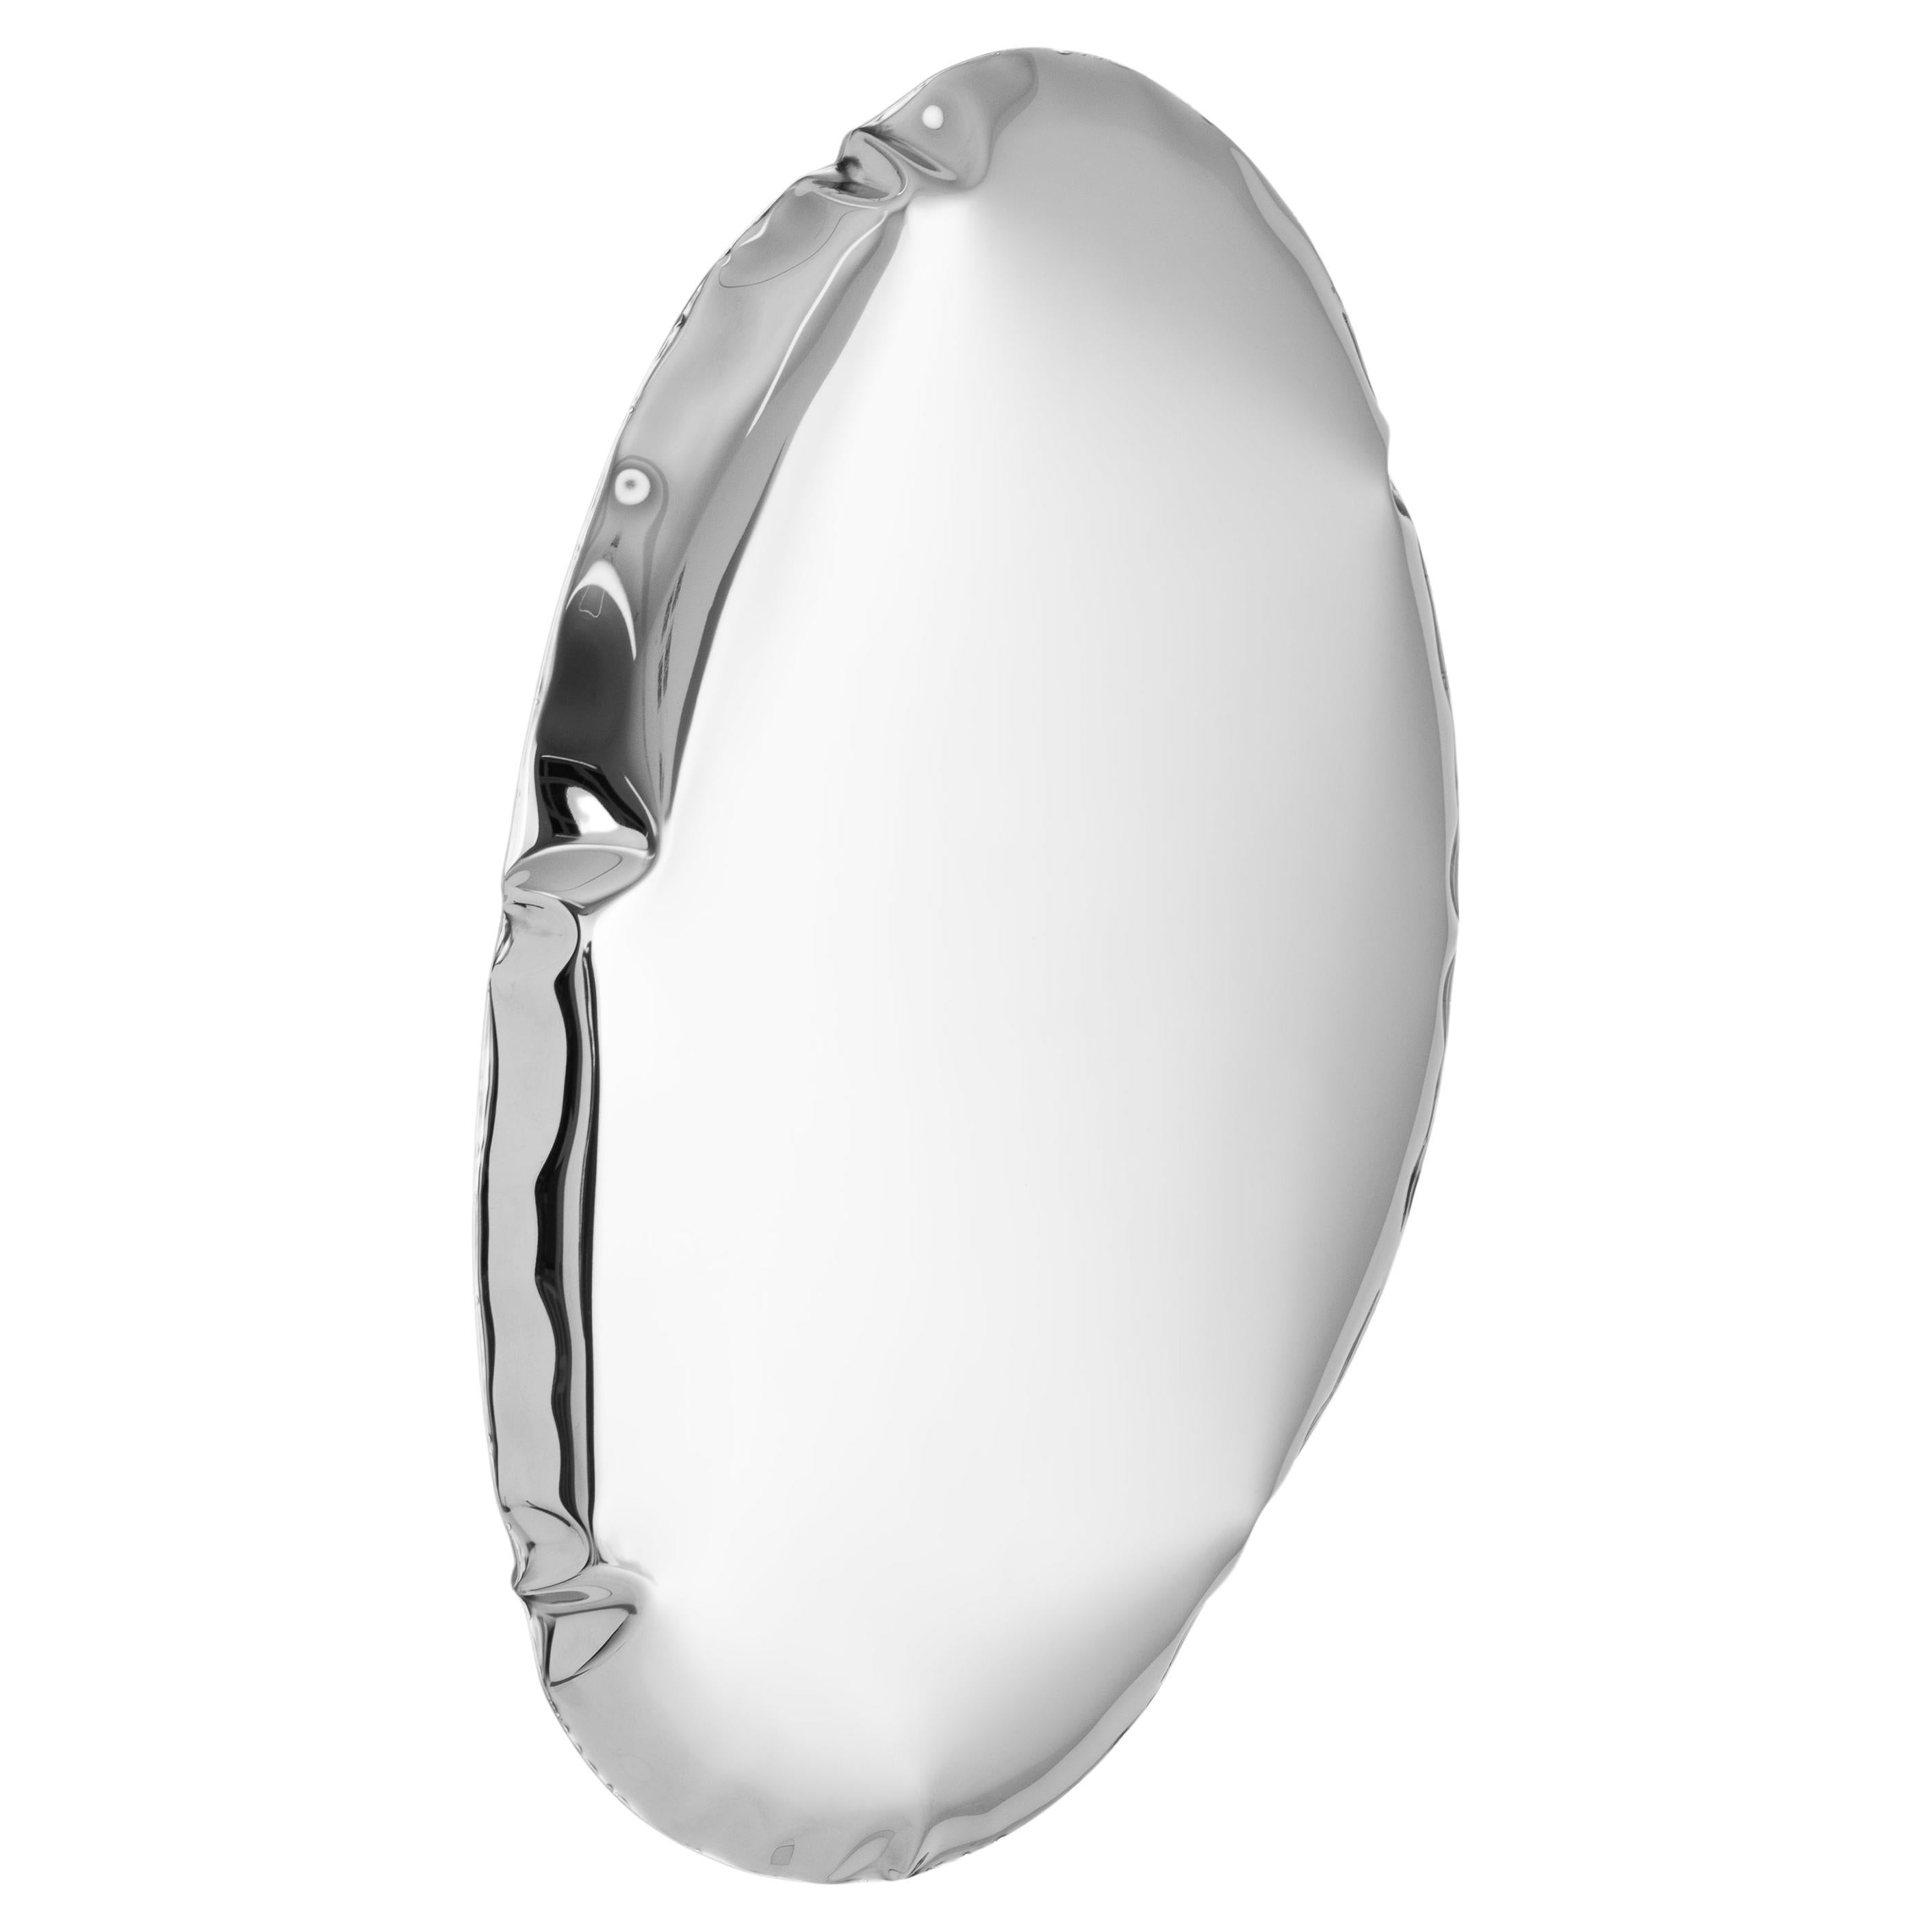 In Stock Tafla O5 Polished Stainless Steel Wall Mirror by Zieta For Sale